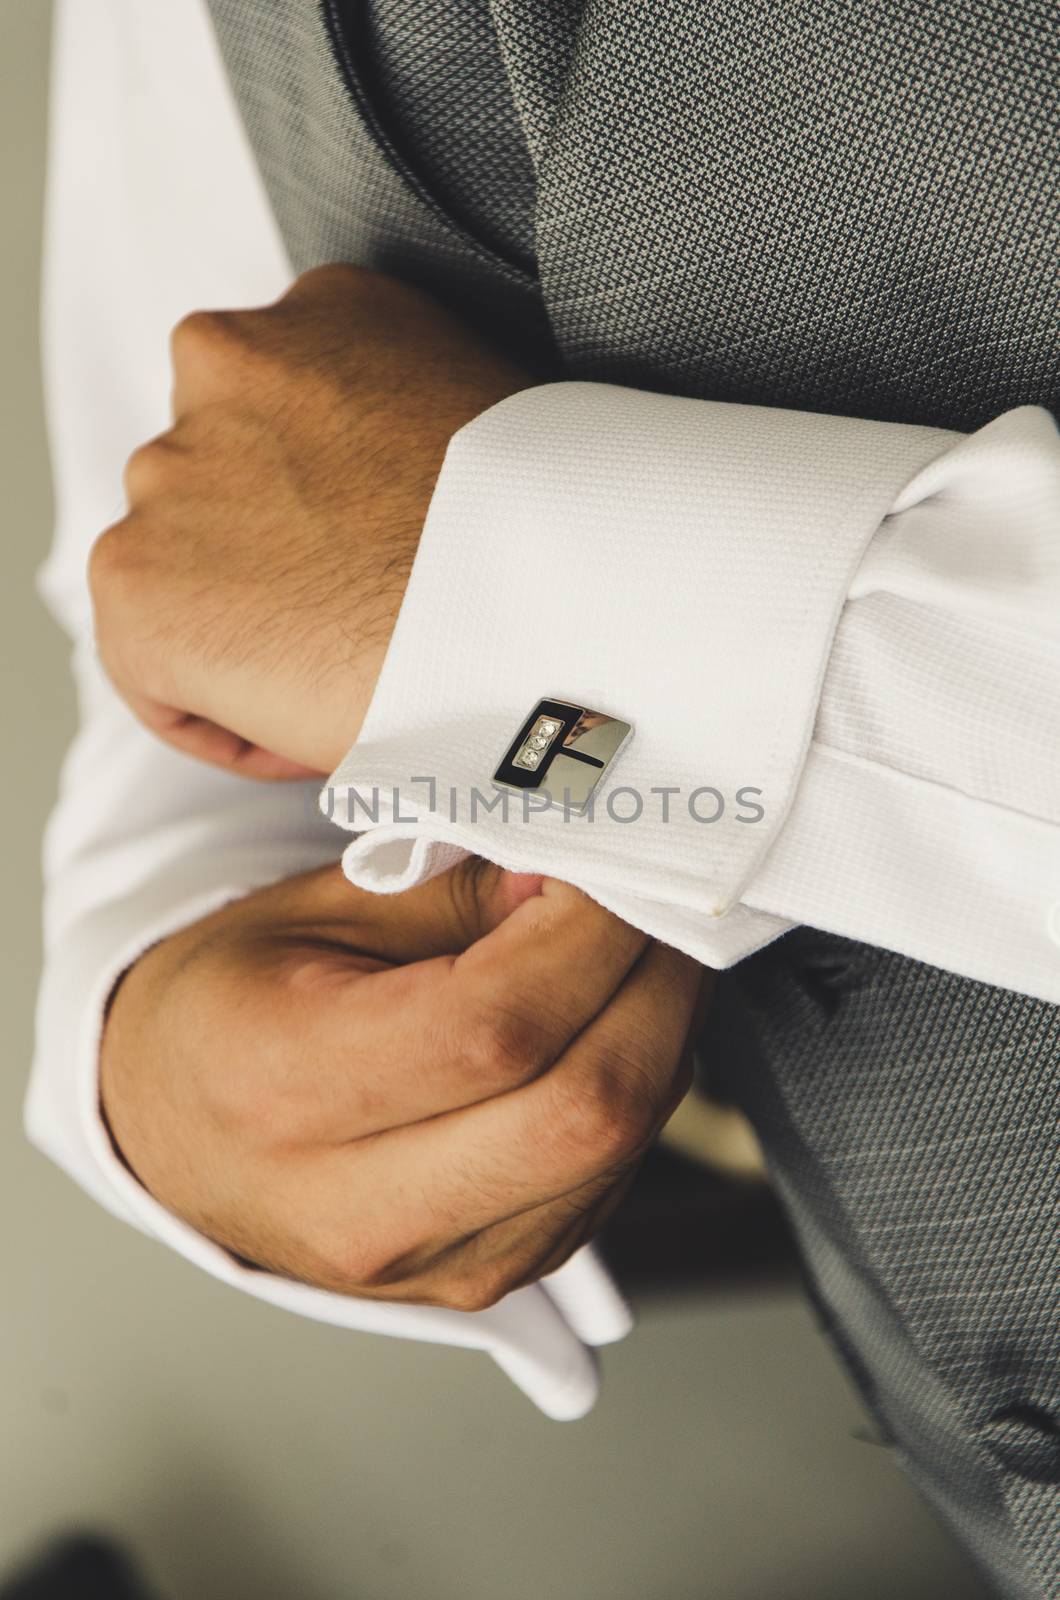 Wedding suit by Peruphotoart